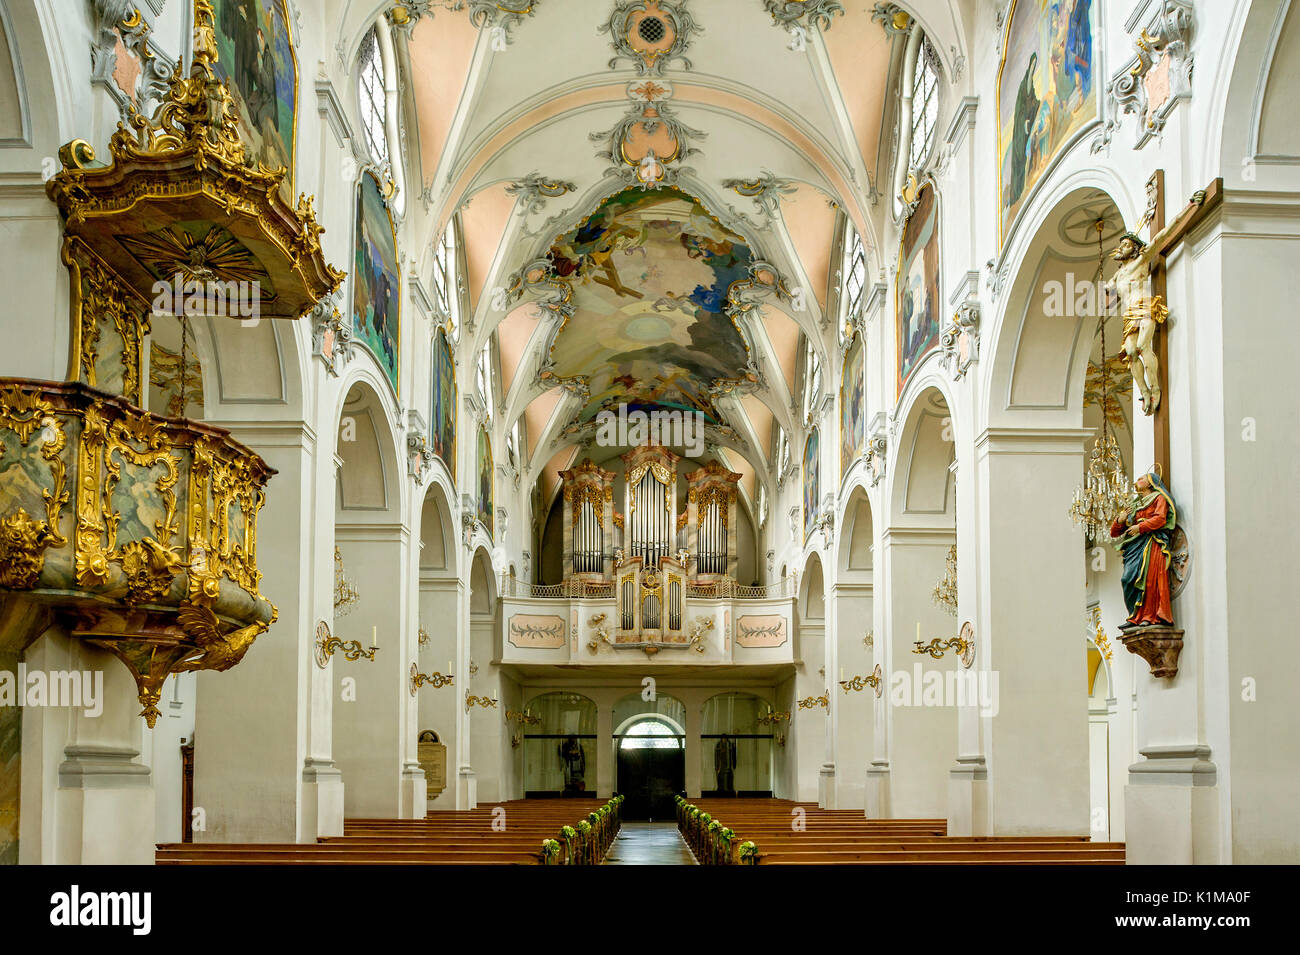 Nave with pulpit and organ, Basilica of the Holy Cross, Cloister Scheyern, Benedictine abbey, district Pfaffenhofen an der Ilm Stock Photo